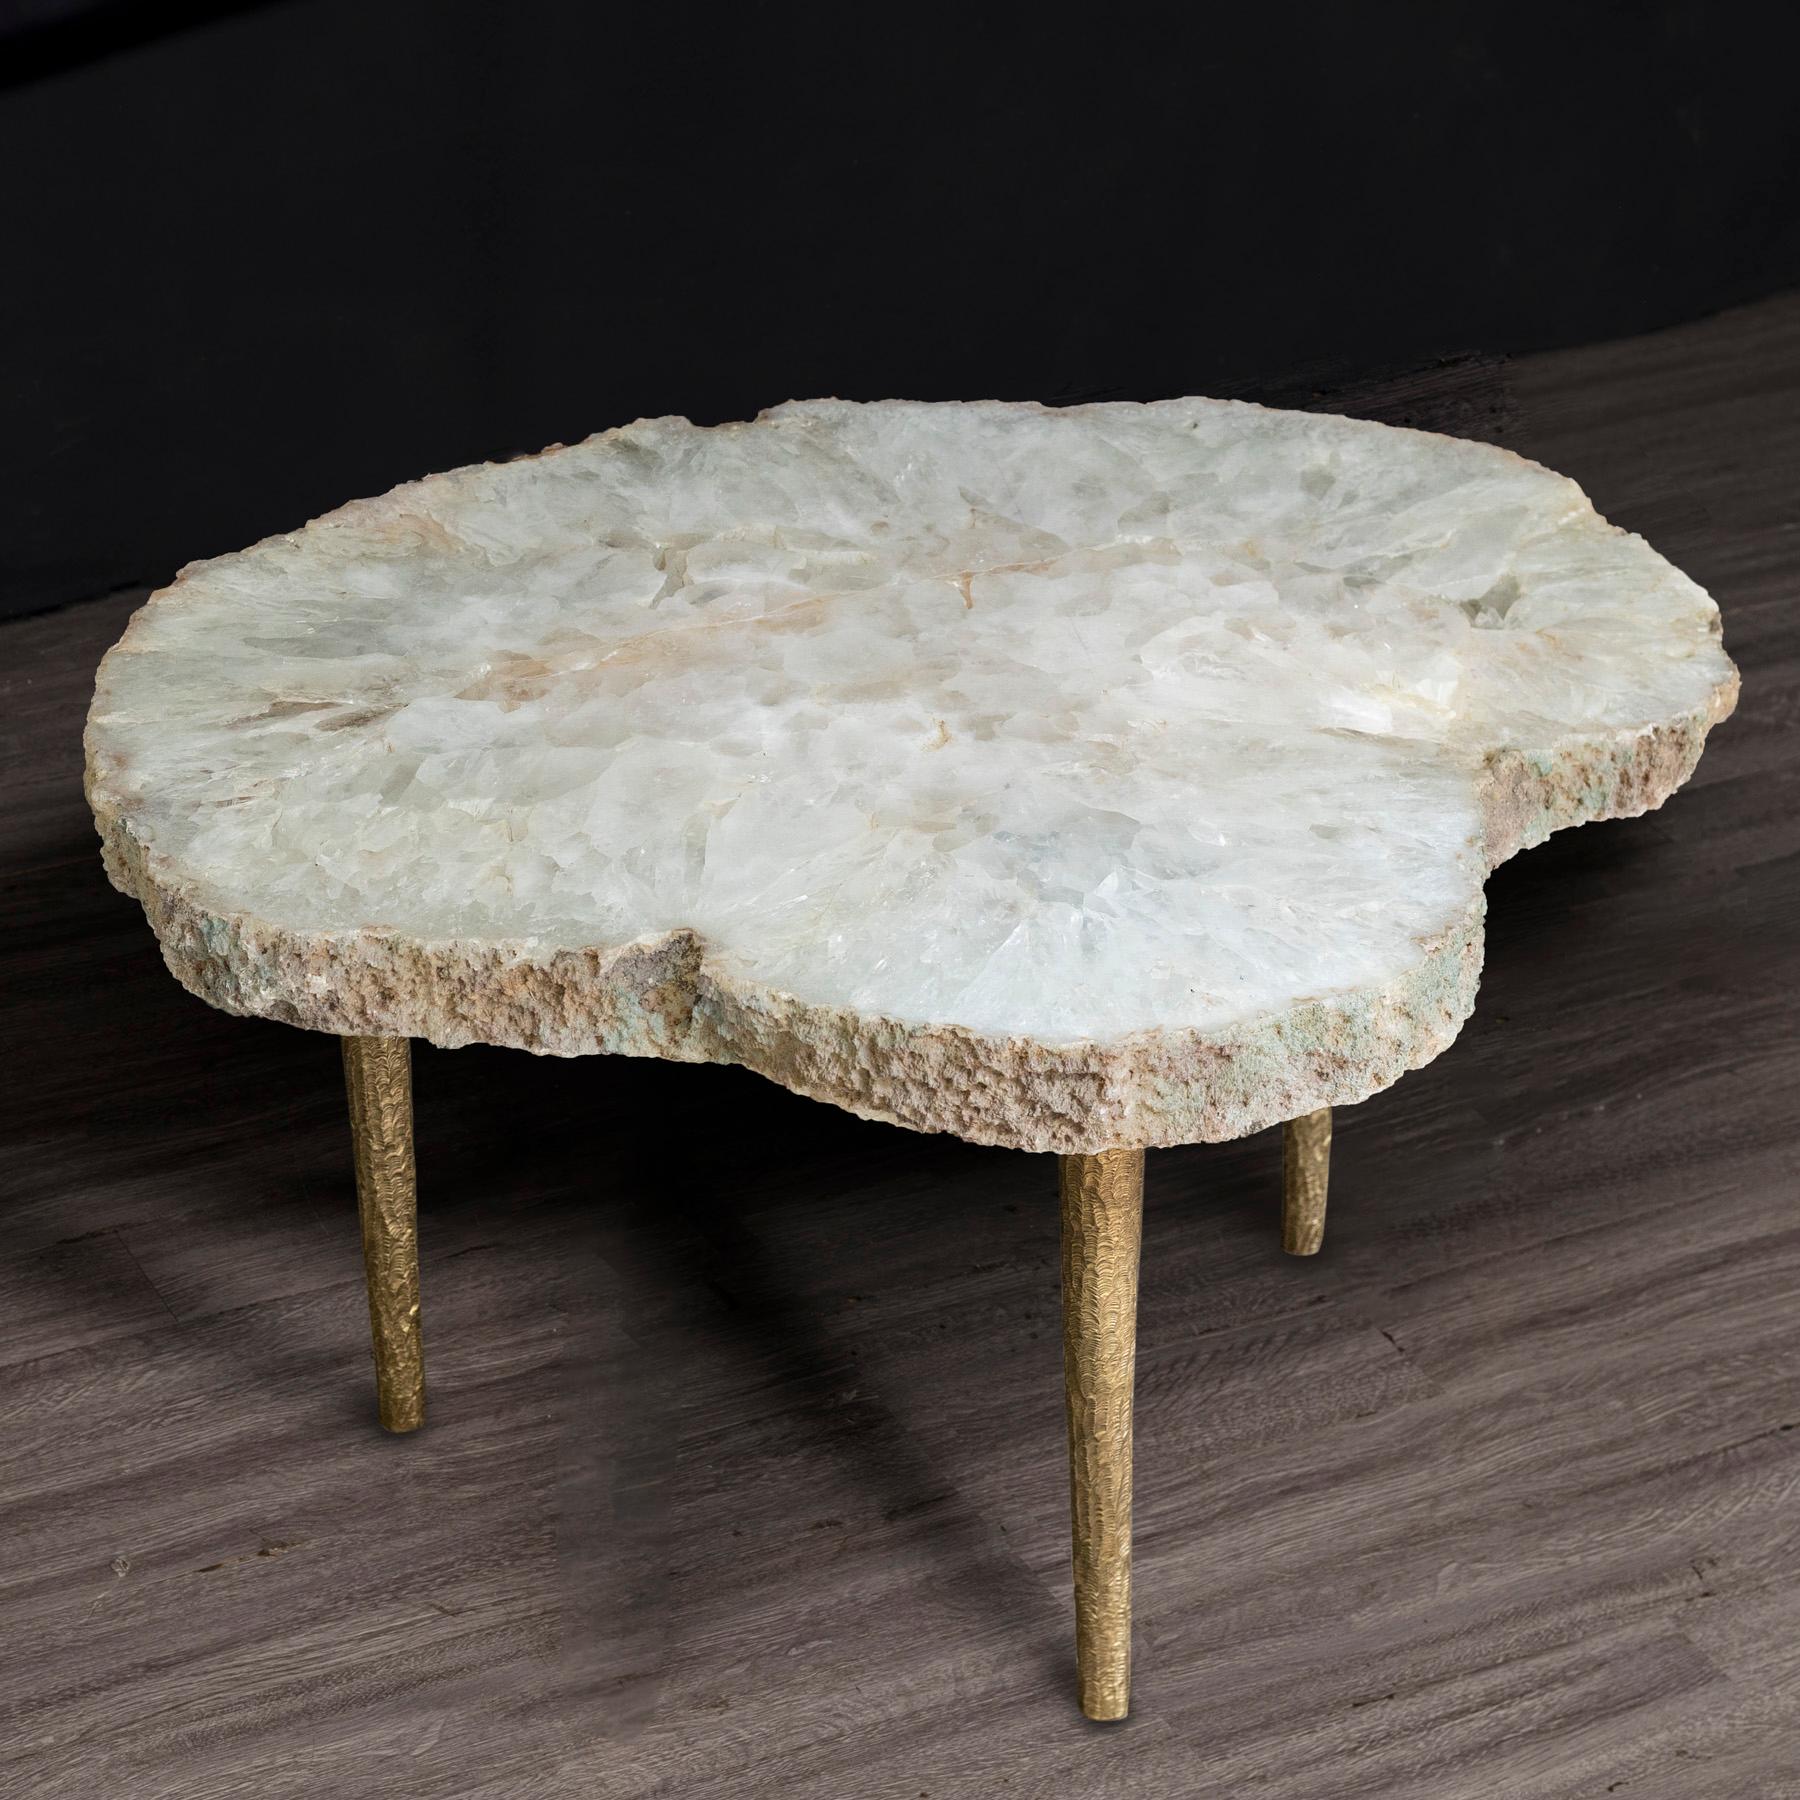 Organic Modern Side or Coffee Table, White Brazilian Agate with Solid Bronze Base